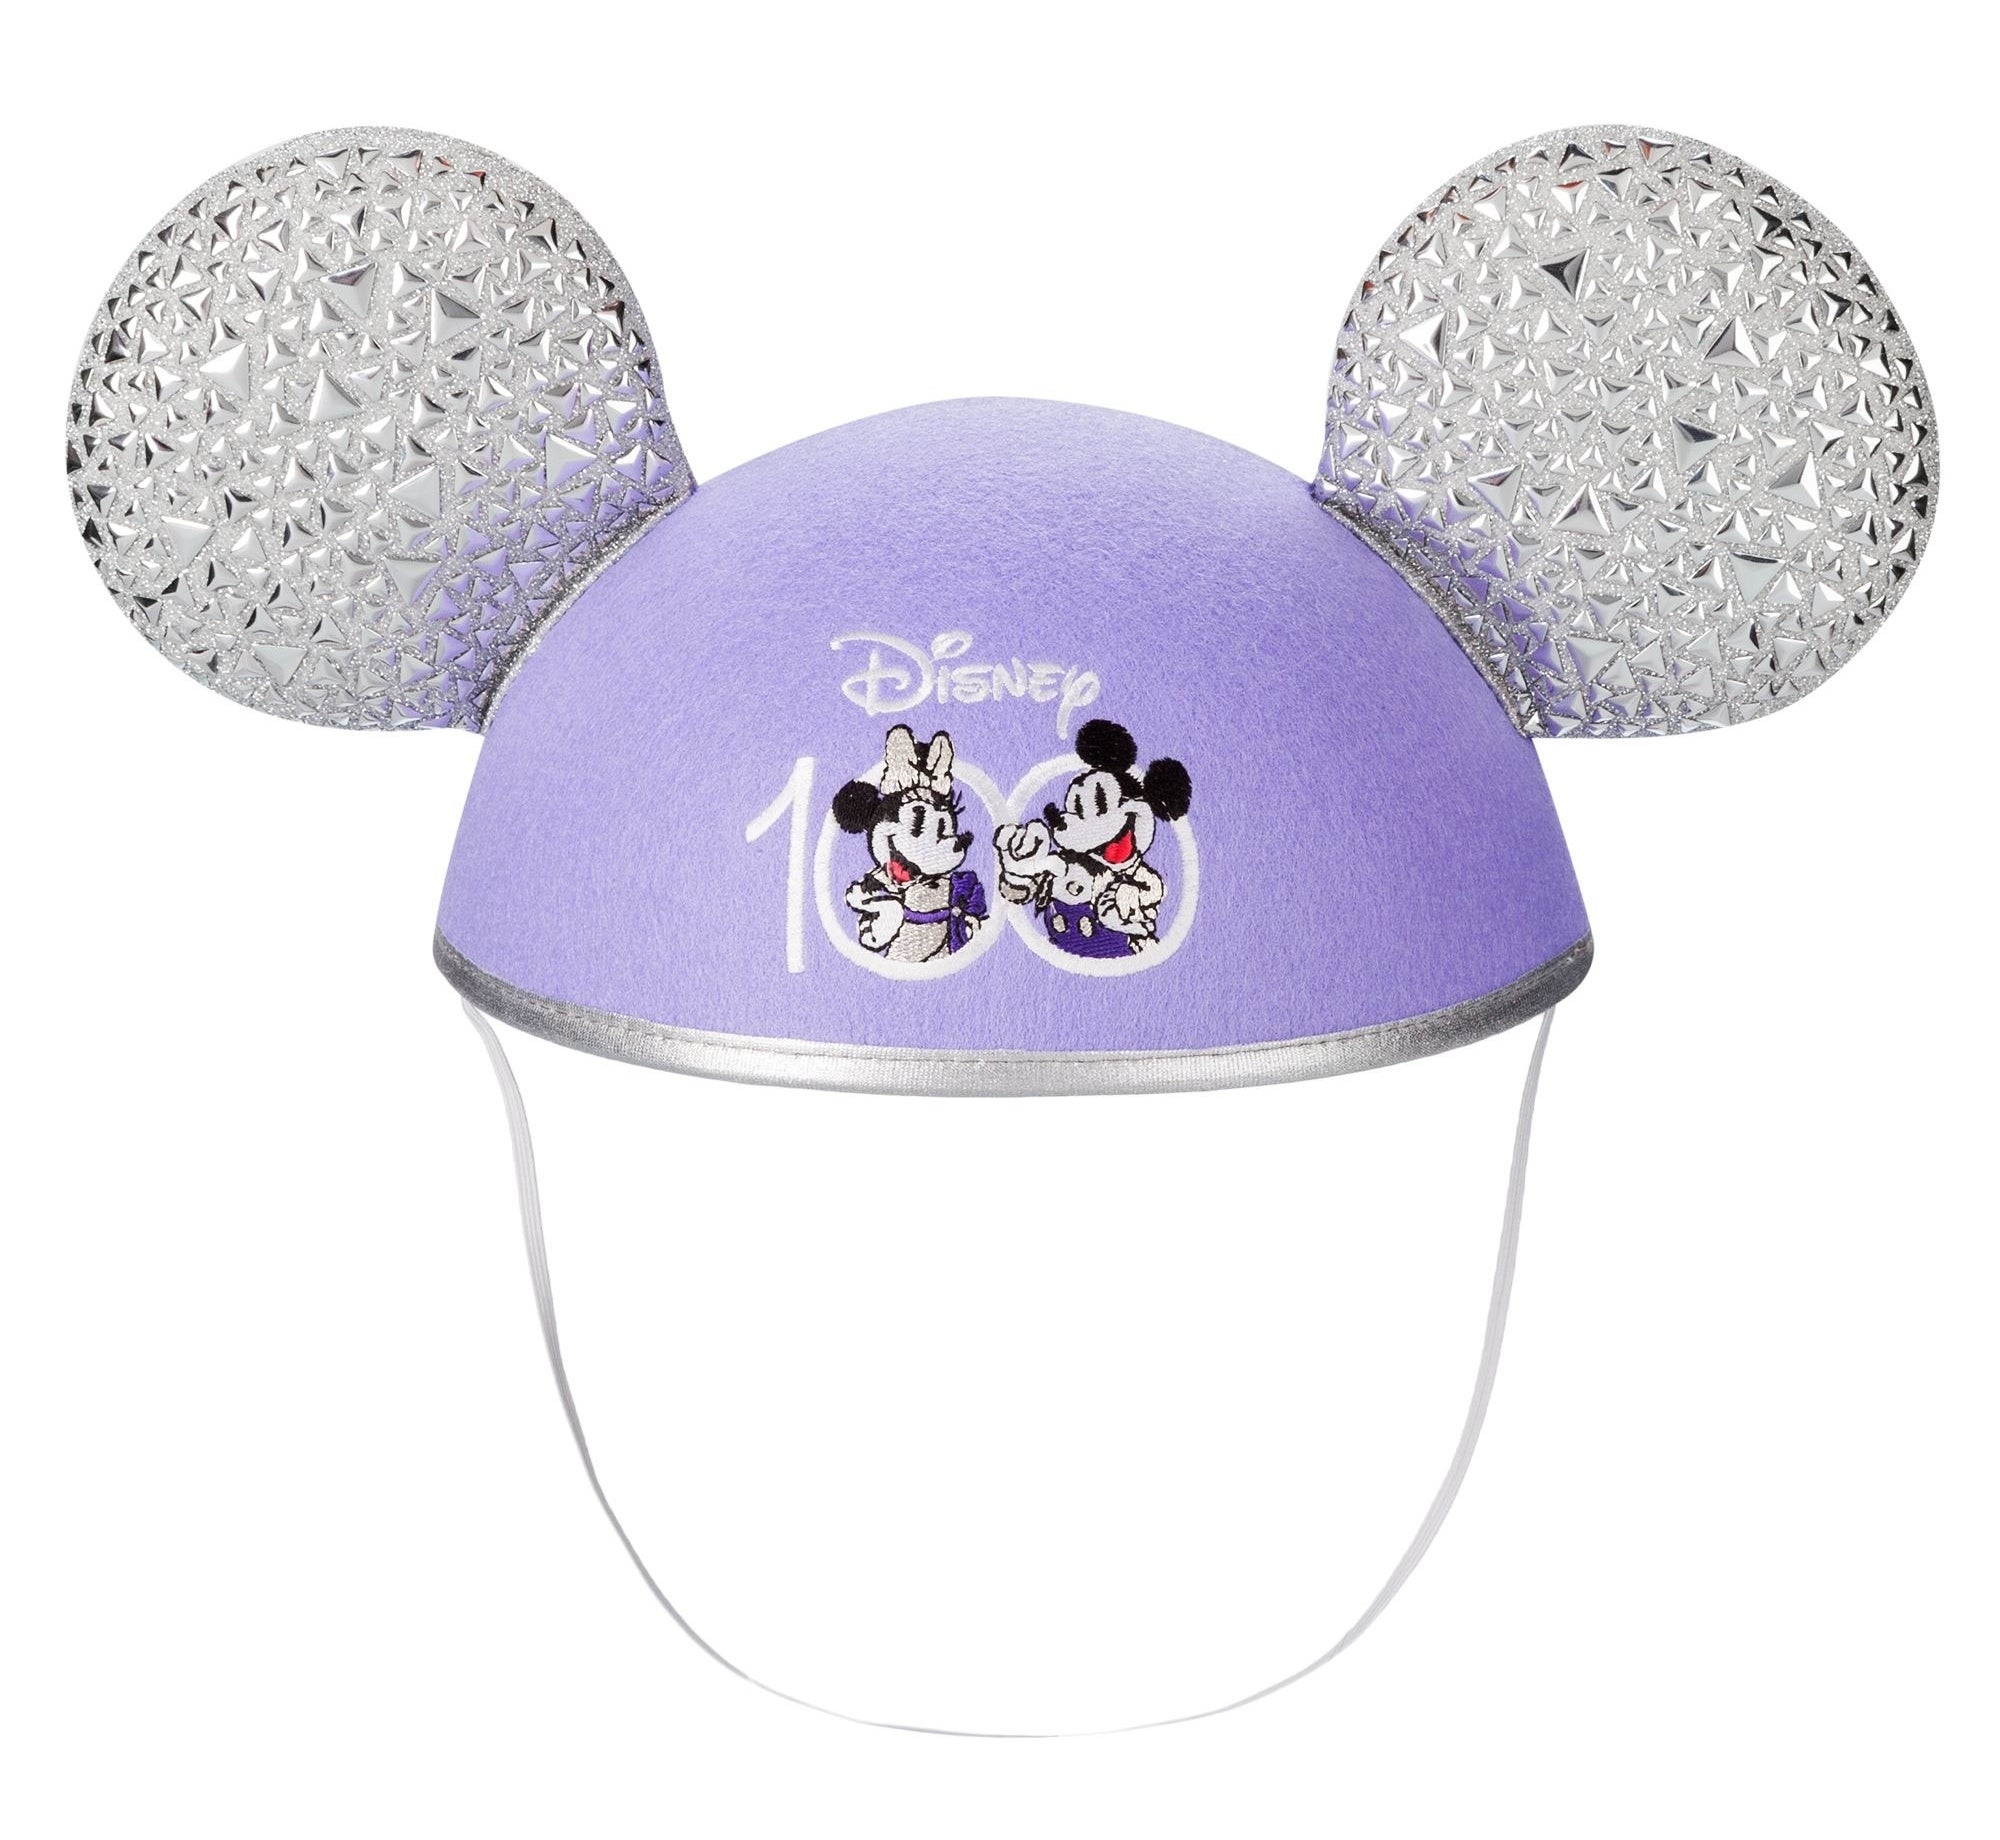 Mickey Mouse ear hat